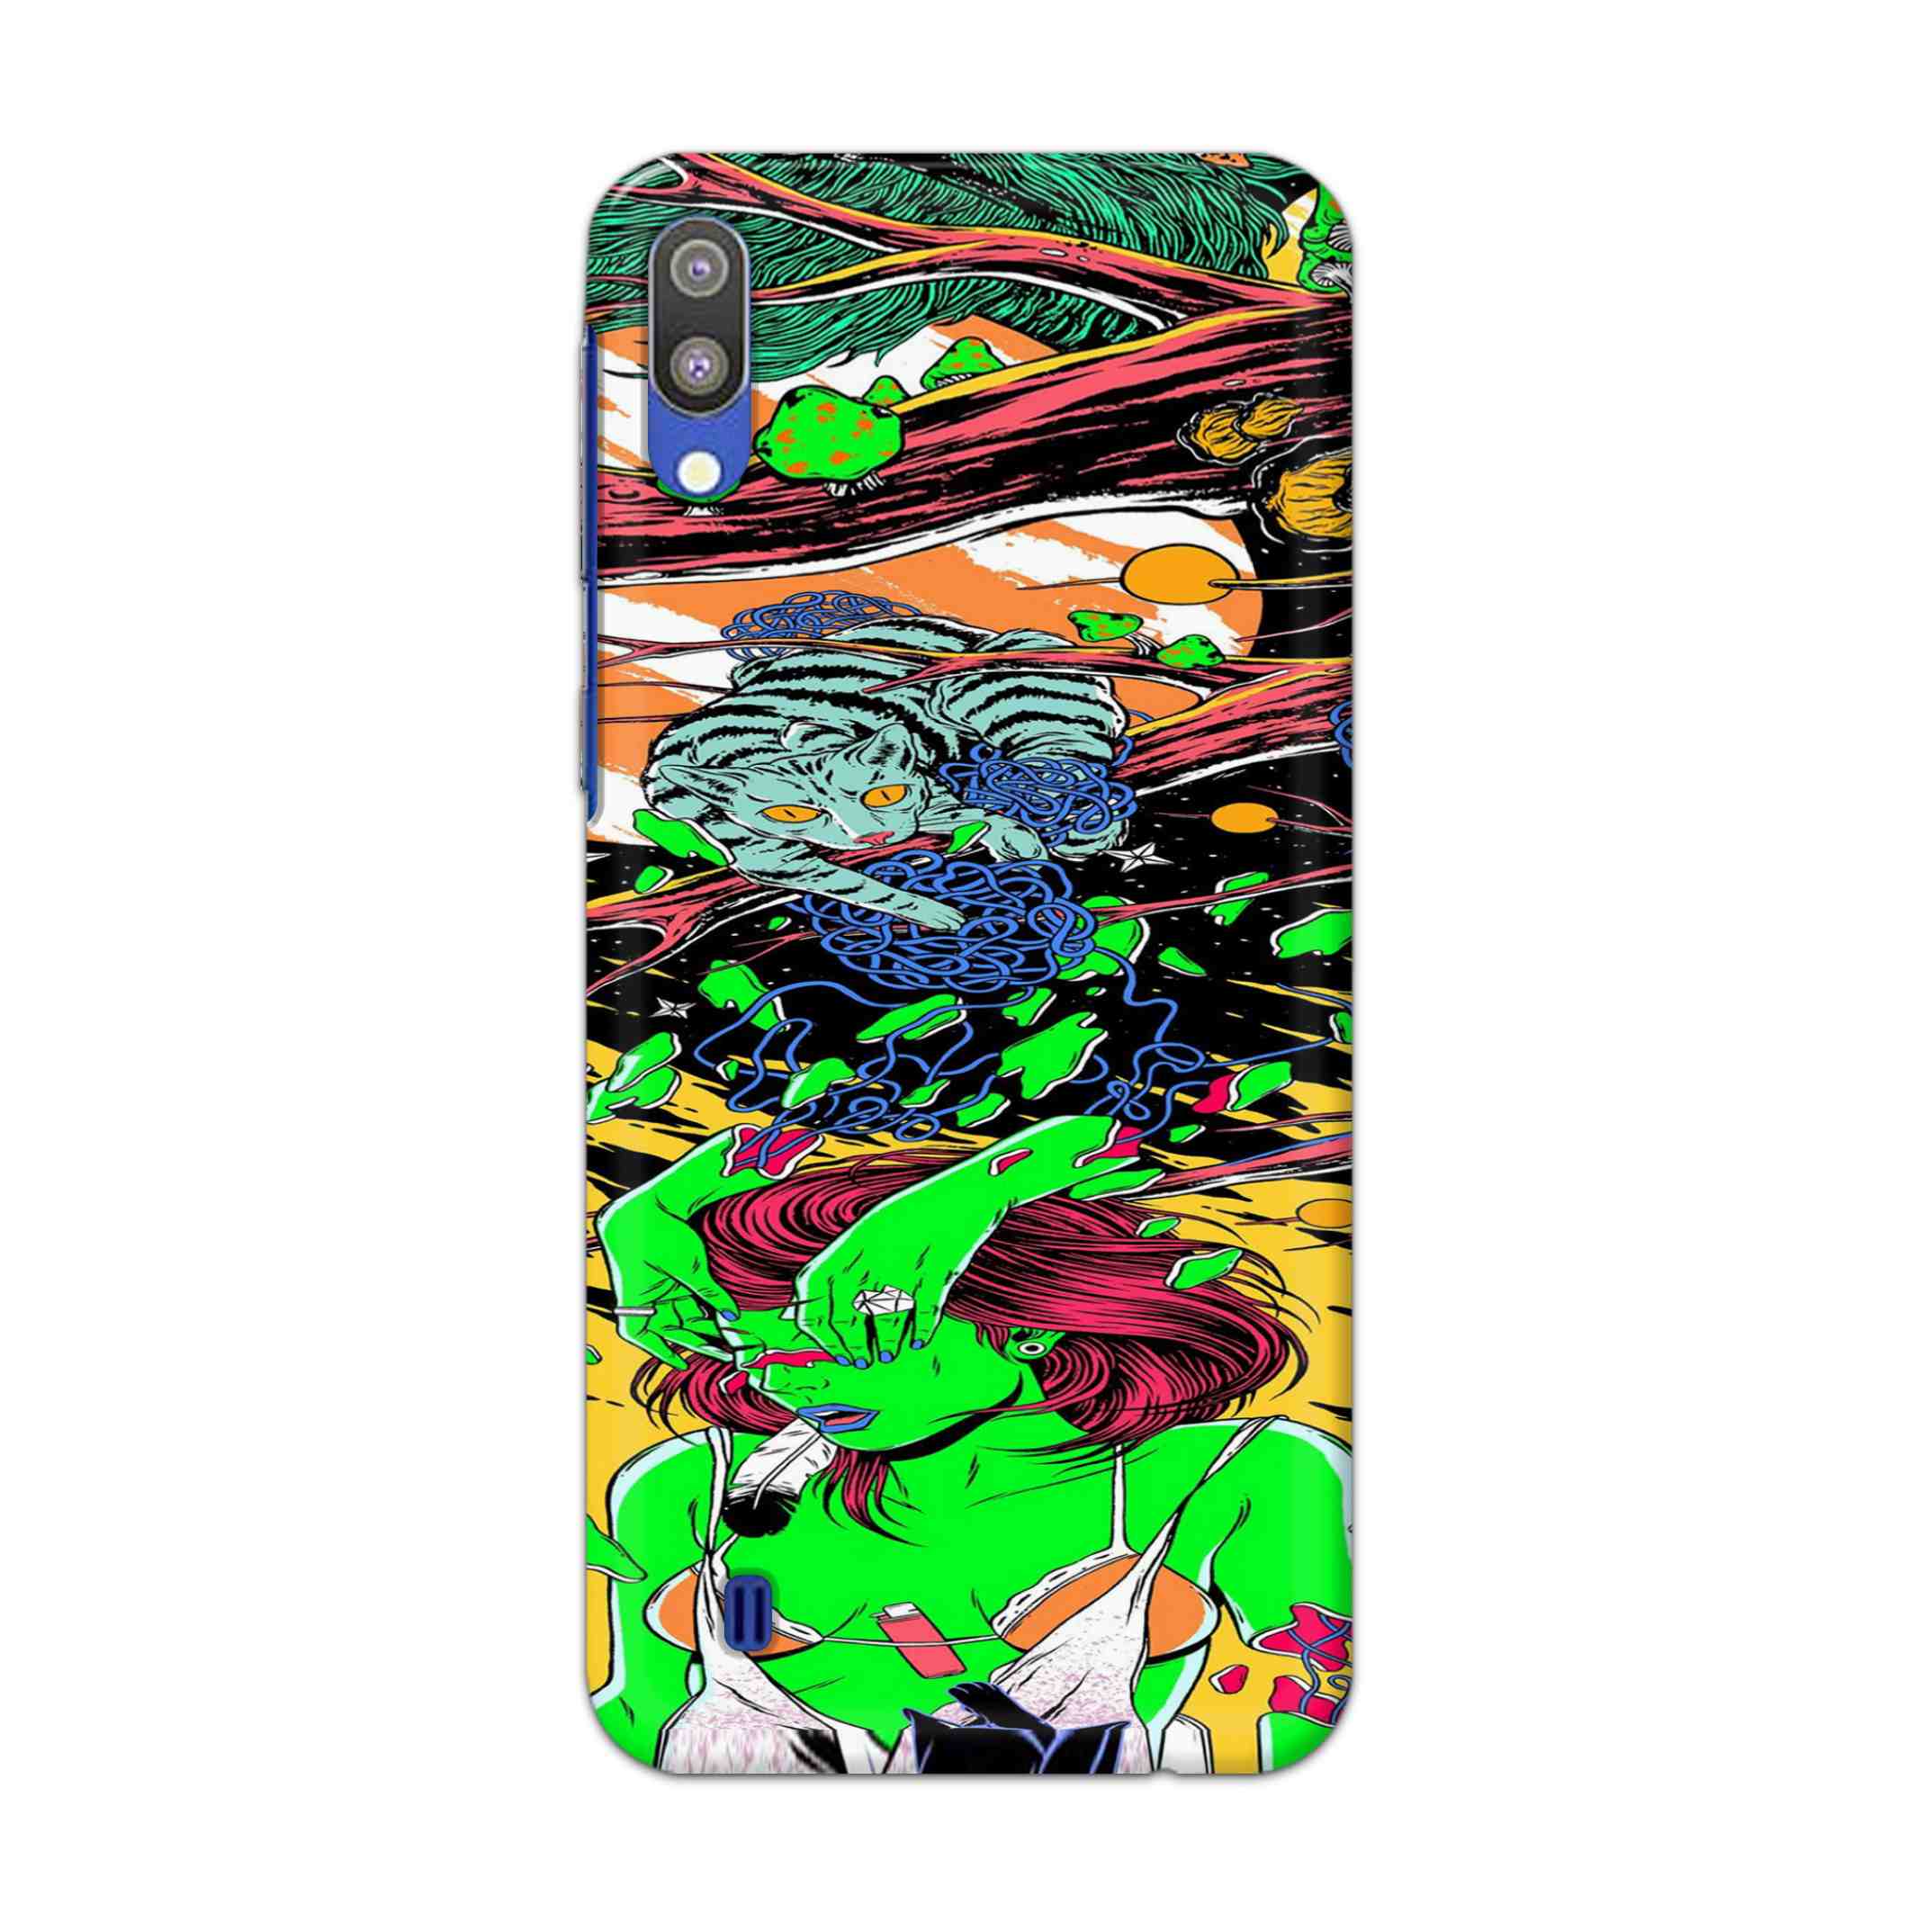 Buy Green Girl Art Hard Back Mobile Phone Case Cover For Samsung Galaxy M10 Online